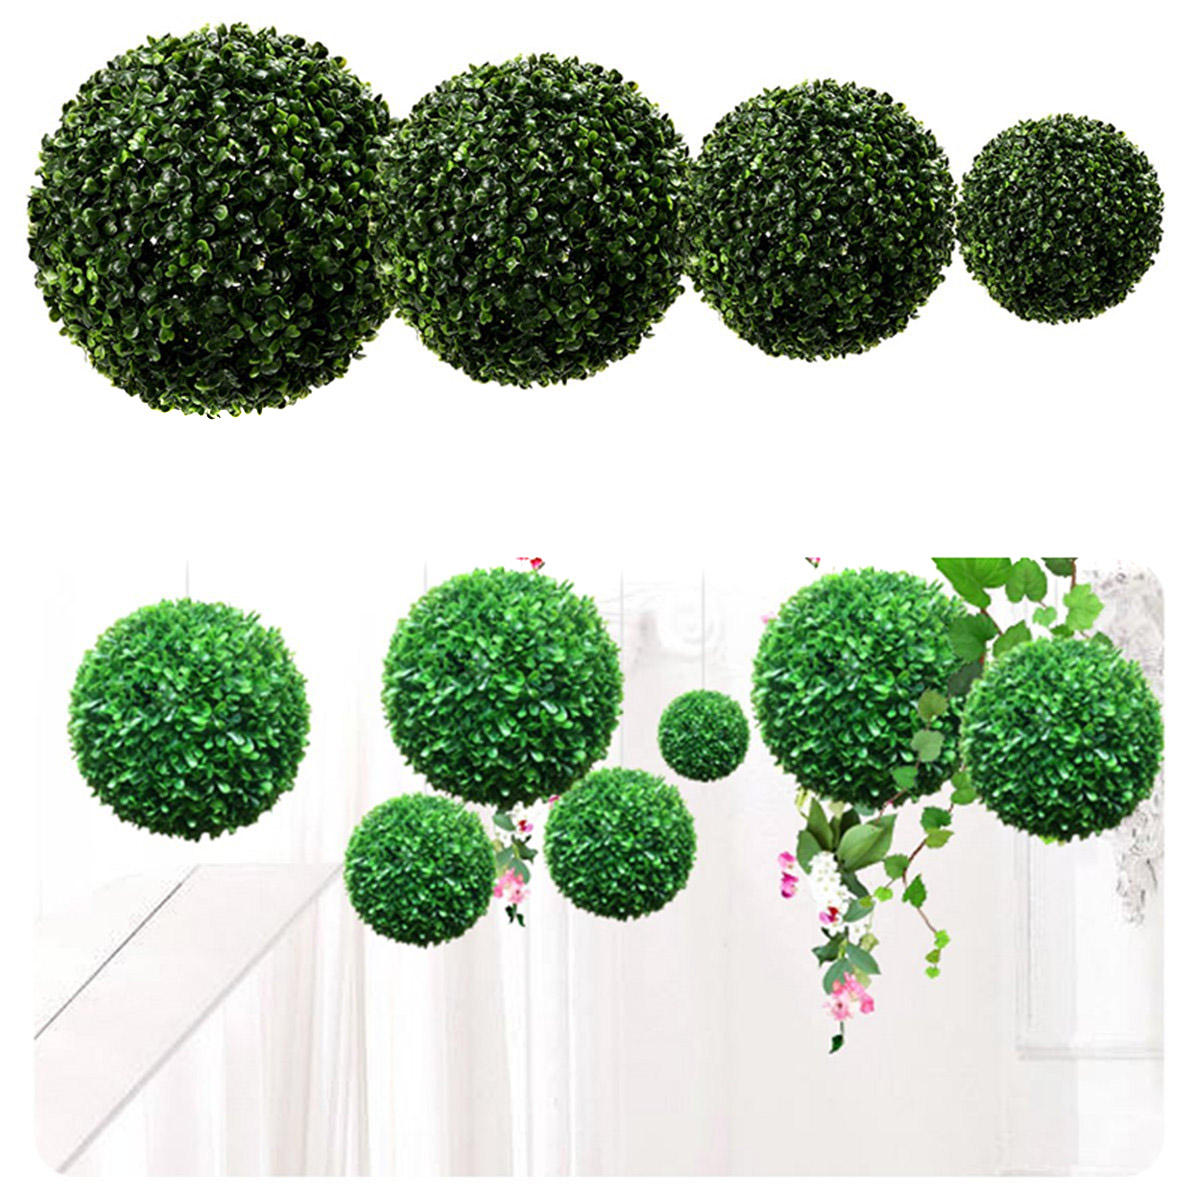 

10-30cm Artificial Green Topiary Grass Hanging Ball Plant Home Yard Decorations